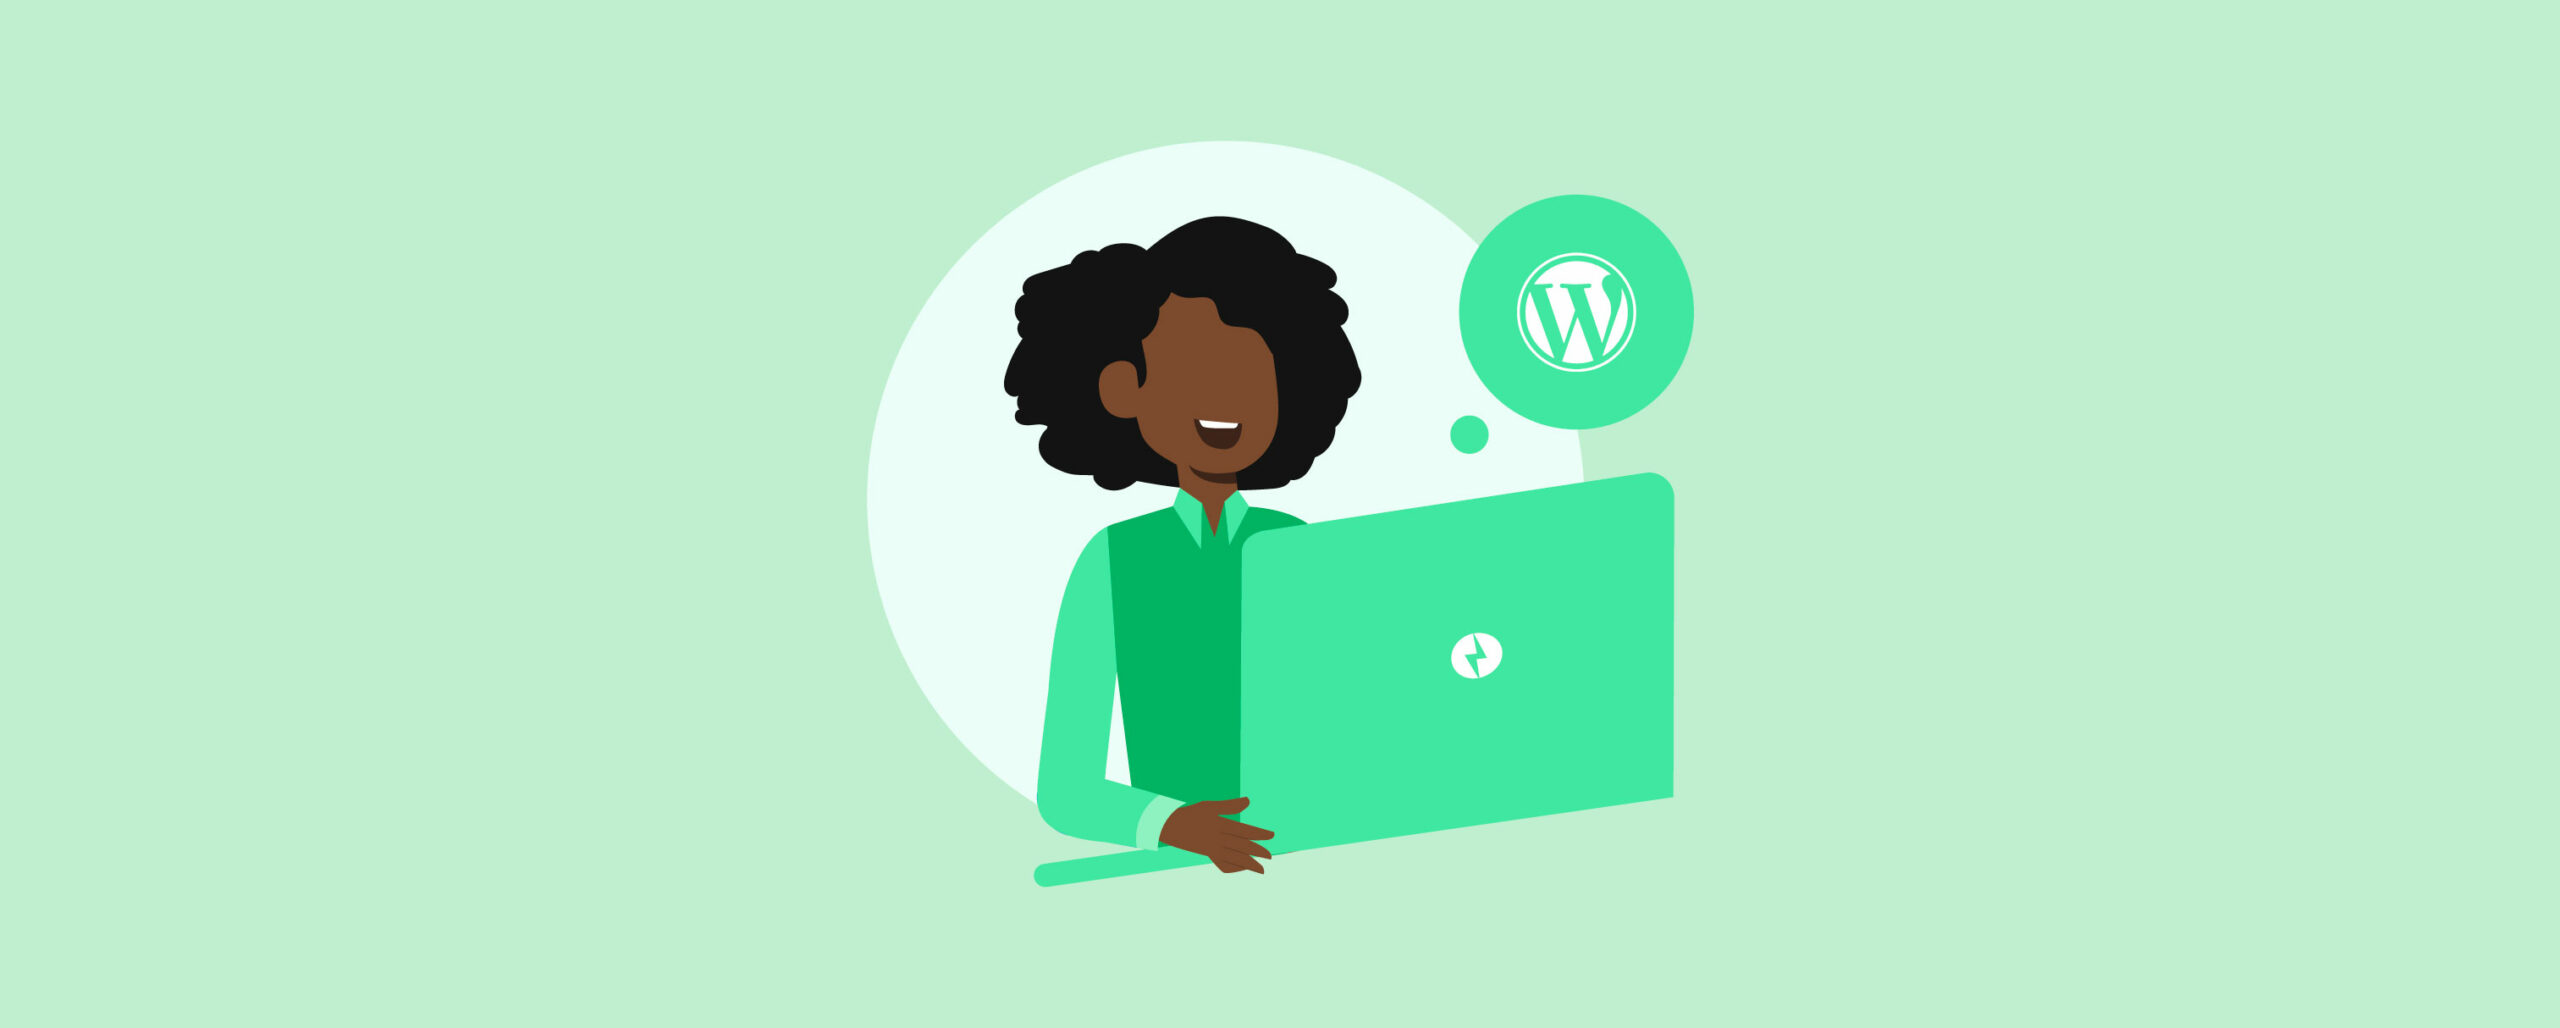 Supercharge your WordPress site with PHP 7